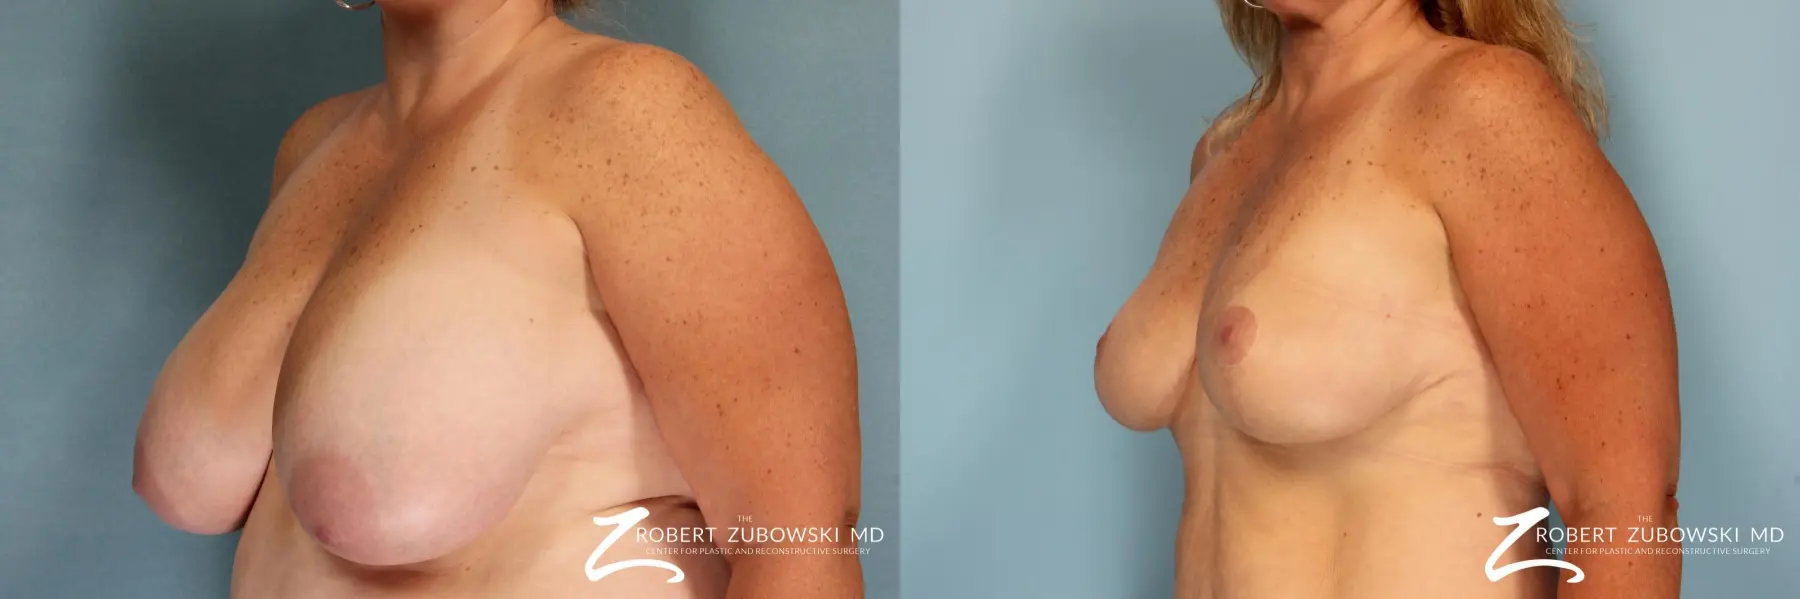 Breast Reduction: Patient 11 - Before and After 2